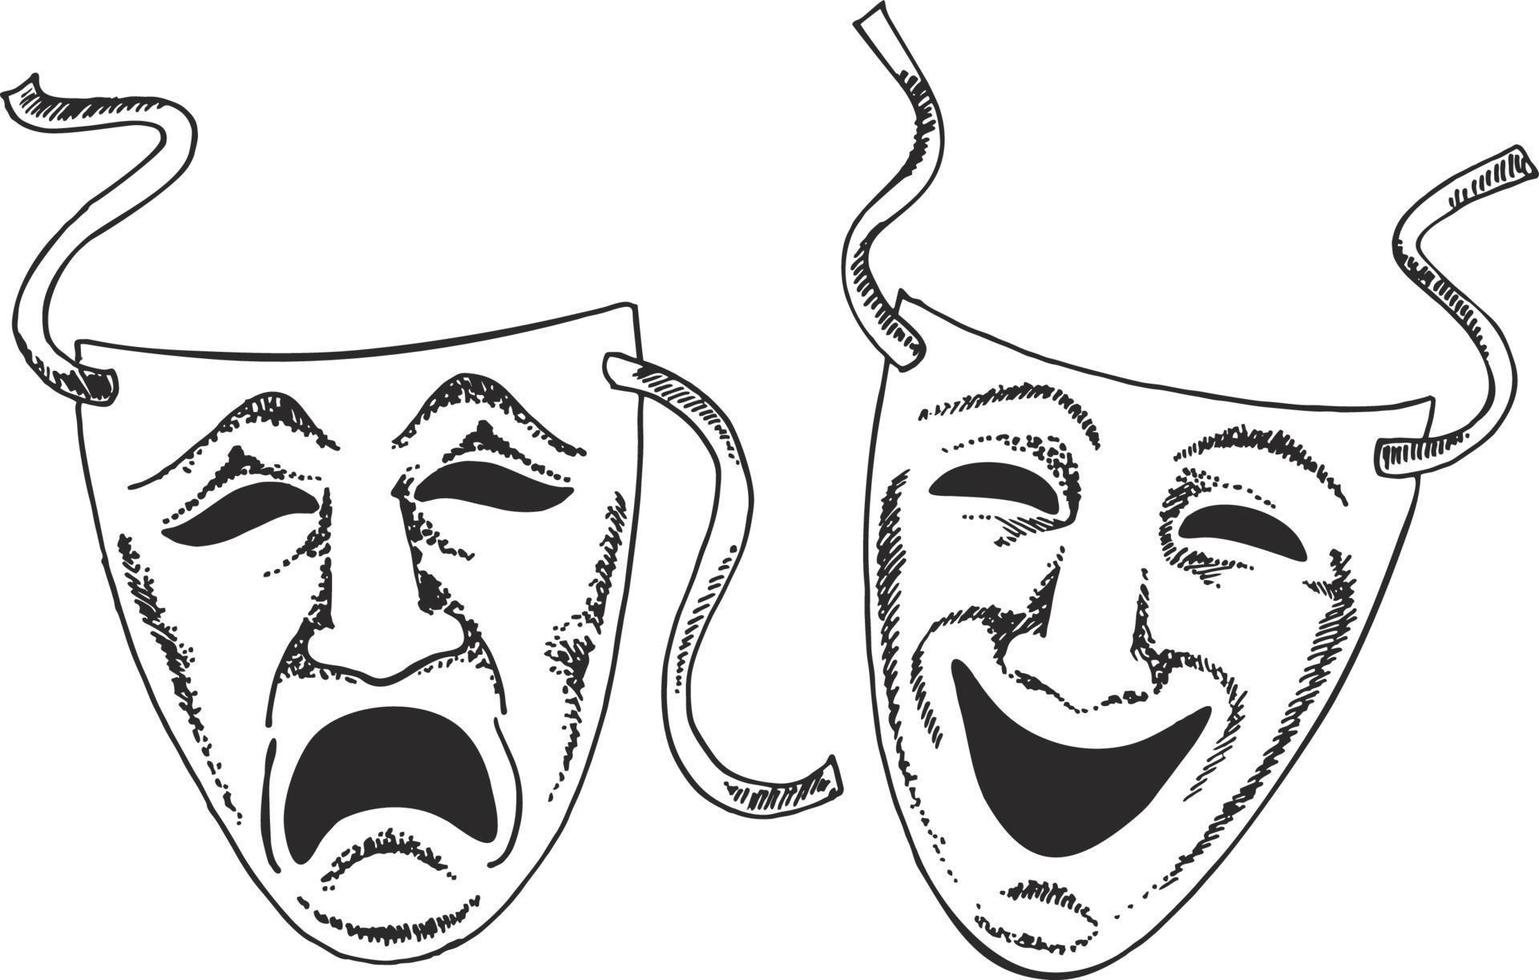 https://static.vecteezy.com/system/resources/previews/010/556/503/non_2x/sketch-style-drama-or-theater-masks-illustration-in-format-suitable-for-web-print-or-advertising-use-vector.jpg